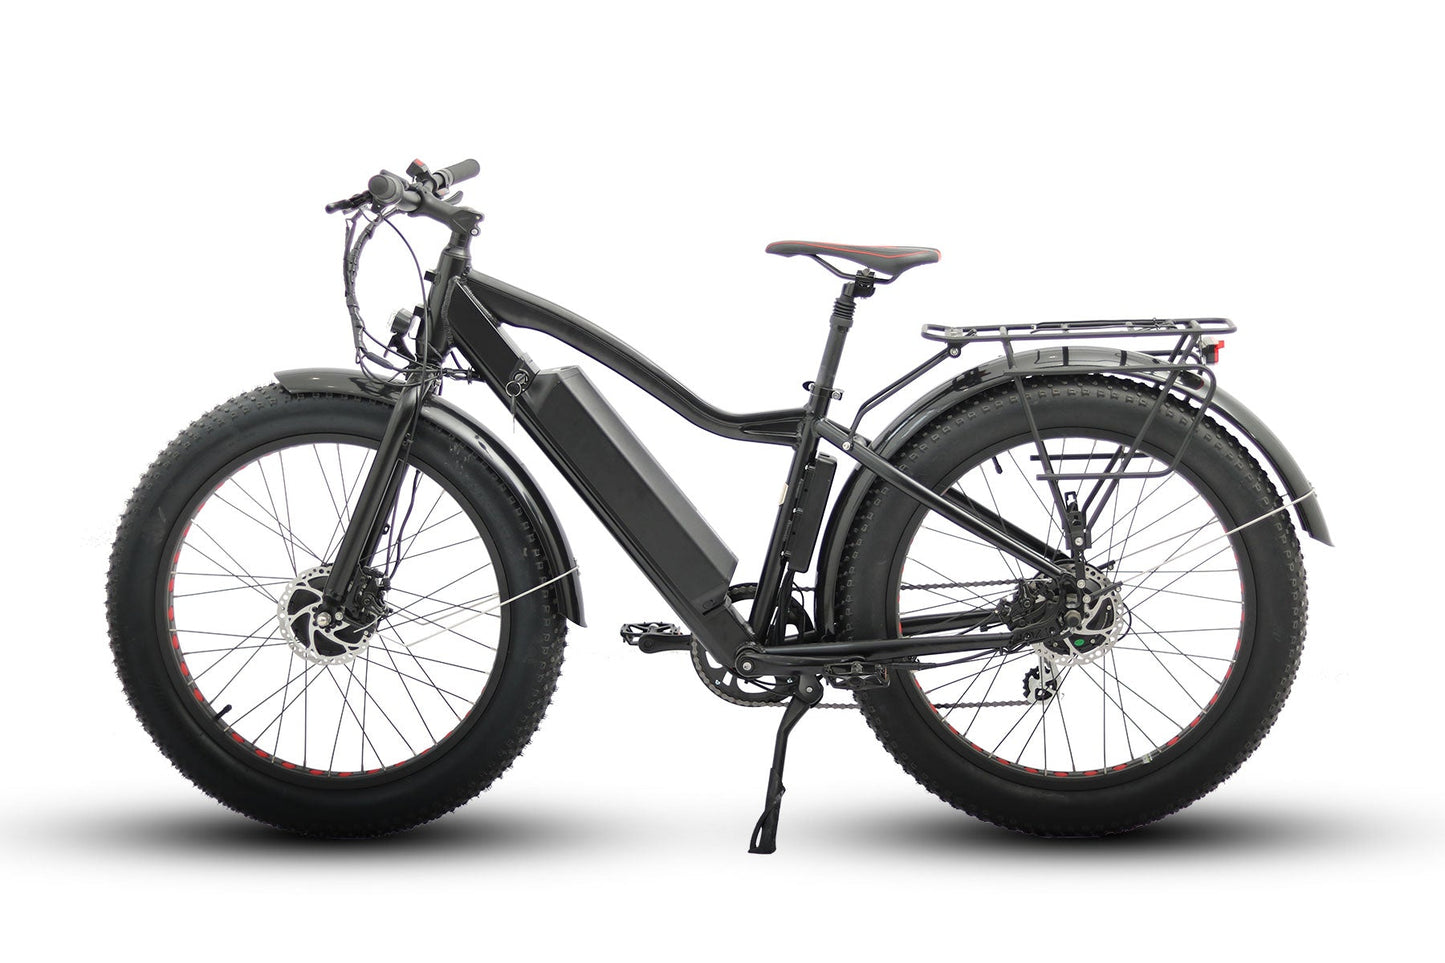 EUNORAU FAT-AWD Electric Bike with dual hub motor and fat tires. 48V/1000W motor and 48V/17.5Ah battery, as well as the high-strength aluminum alloy frame and 26 x 4-inch fat tires that provide exceptional traction and stability. The image also displays the Shimano 7-speed transmission system and hydraulic disc brakes, which provide powerful stopping power. Additionally, the integrated LED headlight and taillight of the EUNORAU FAT-AWD Electric Bike ensure visibility in low-light conditions.